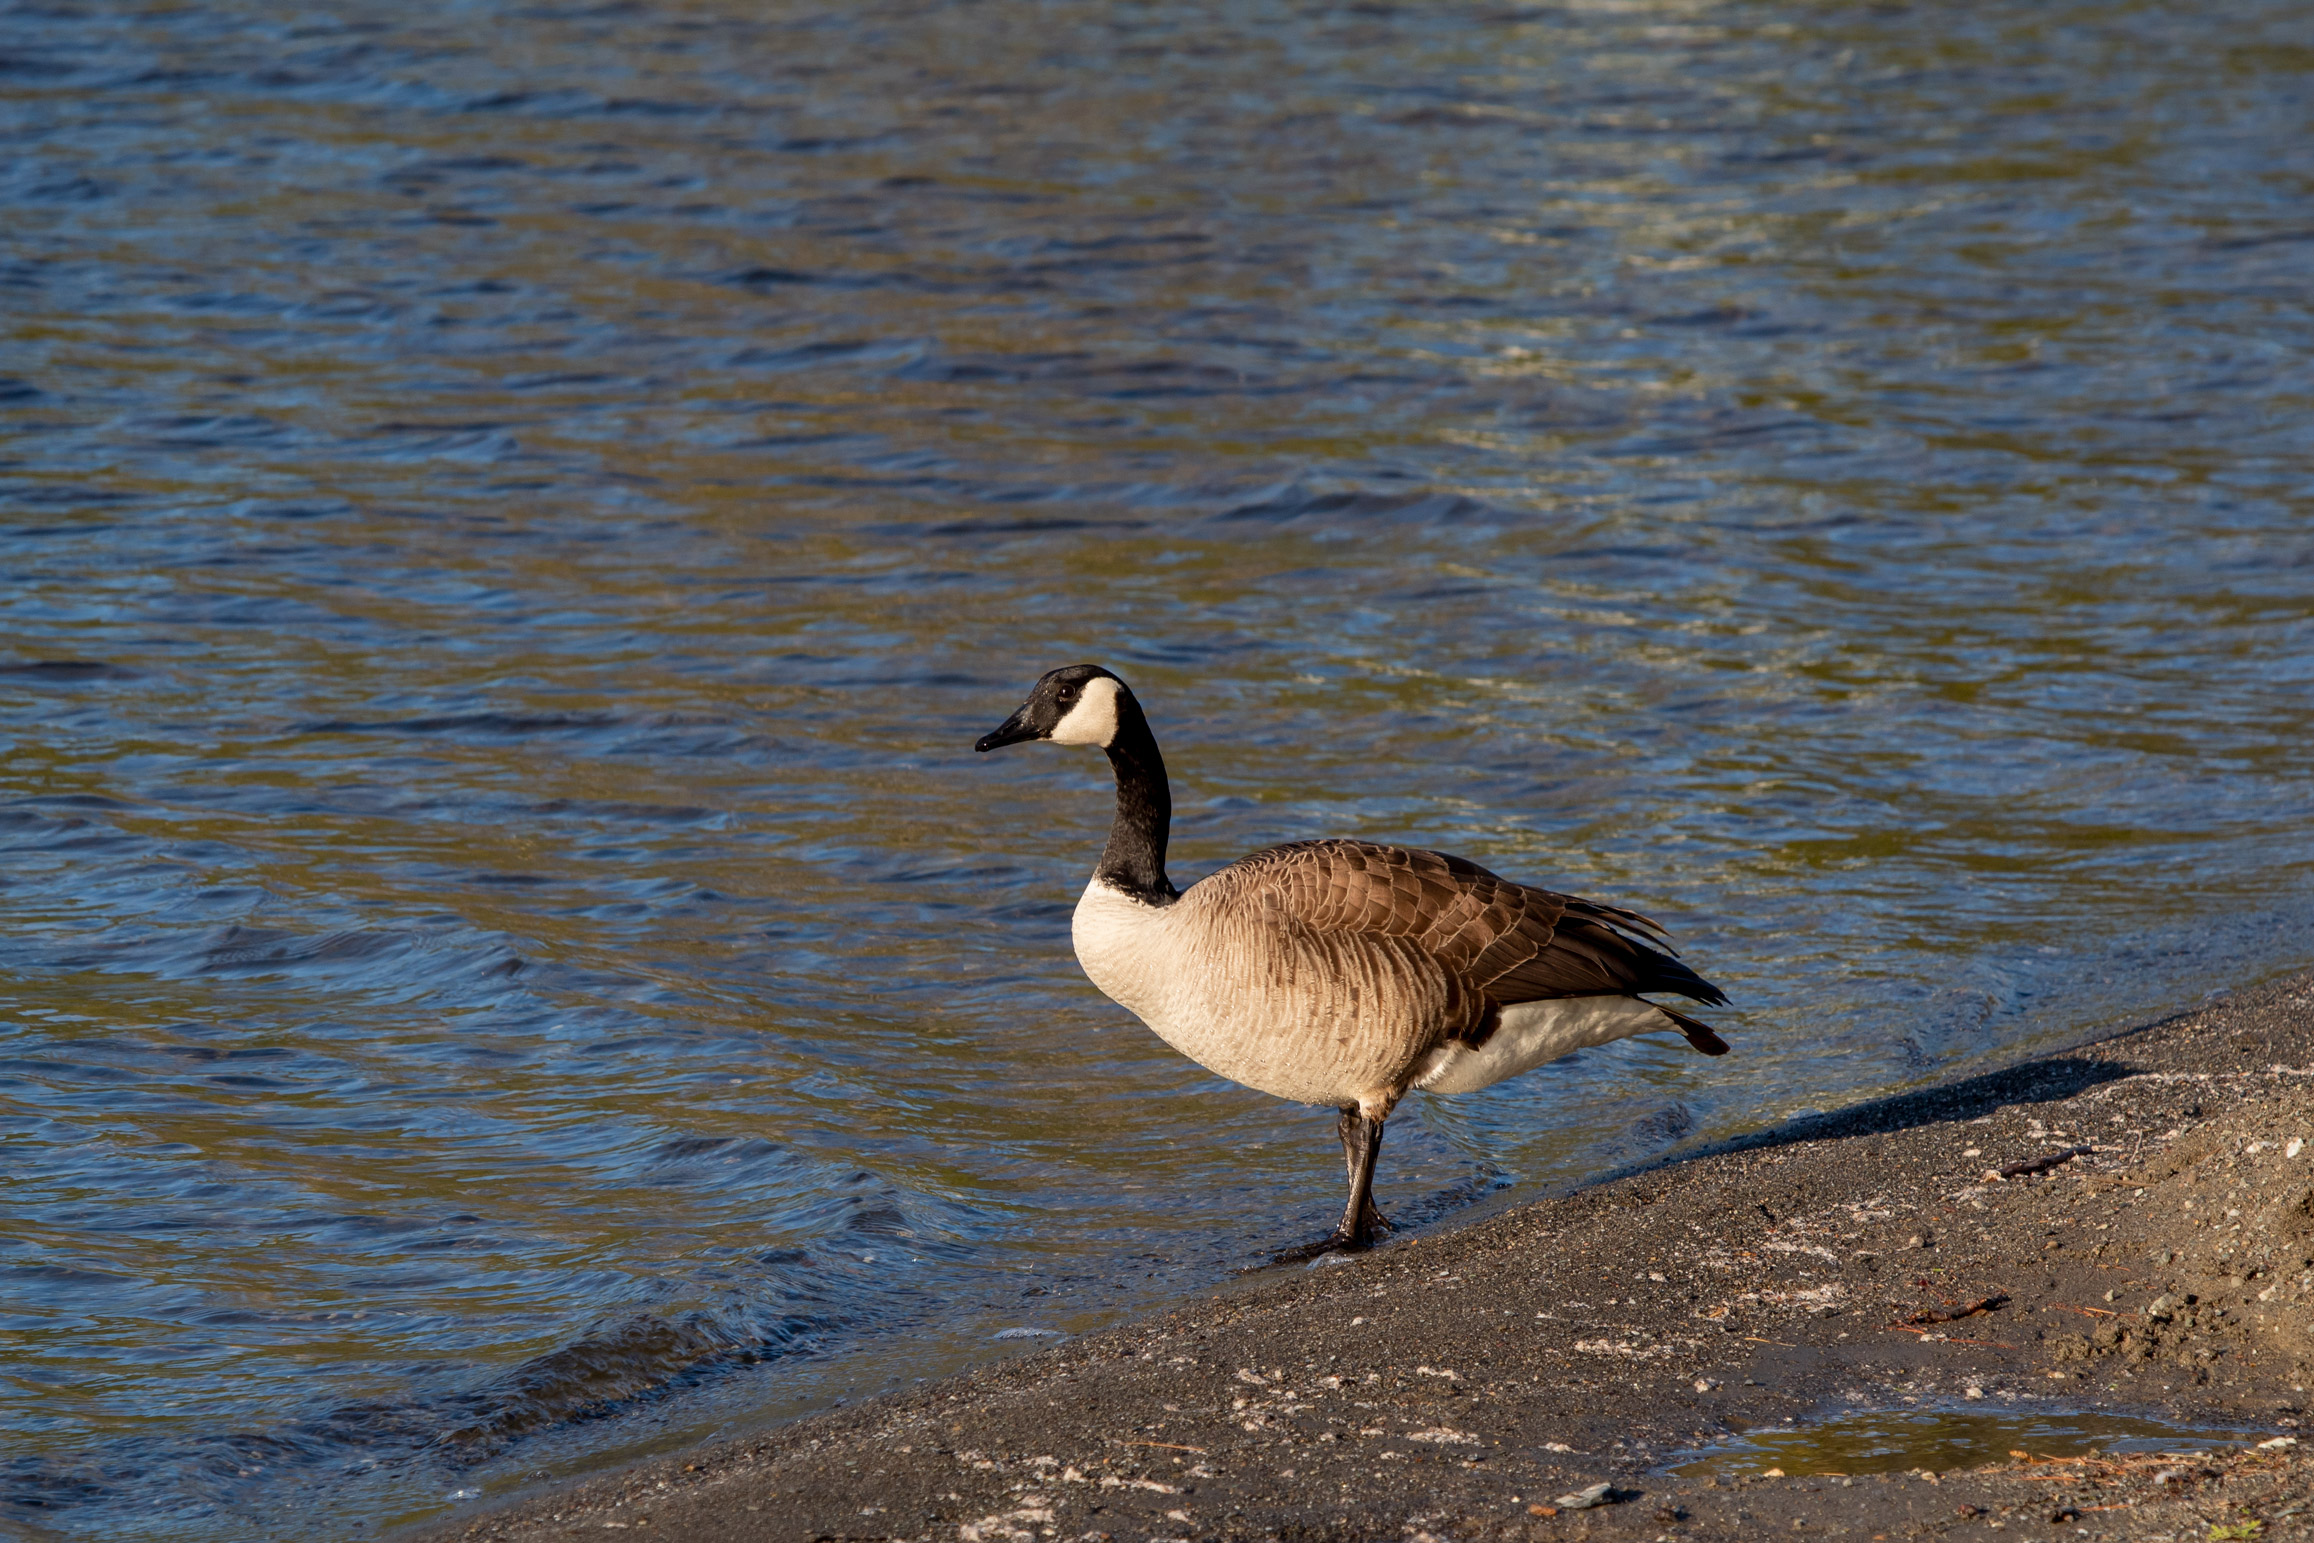 Canadian Goose walking along the border between a sandy beach and a watery lake